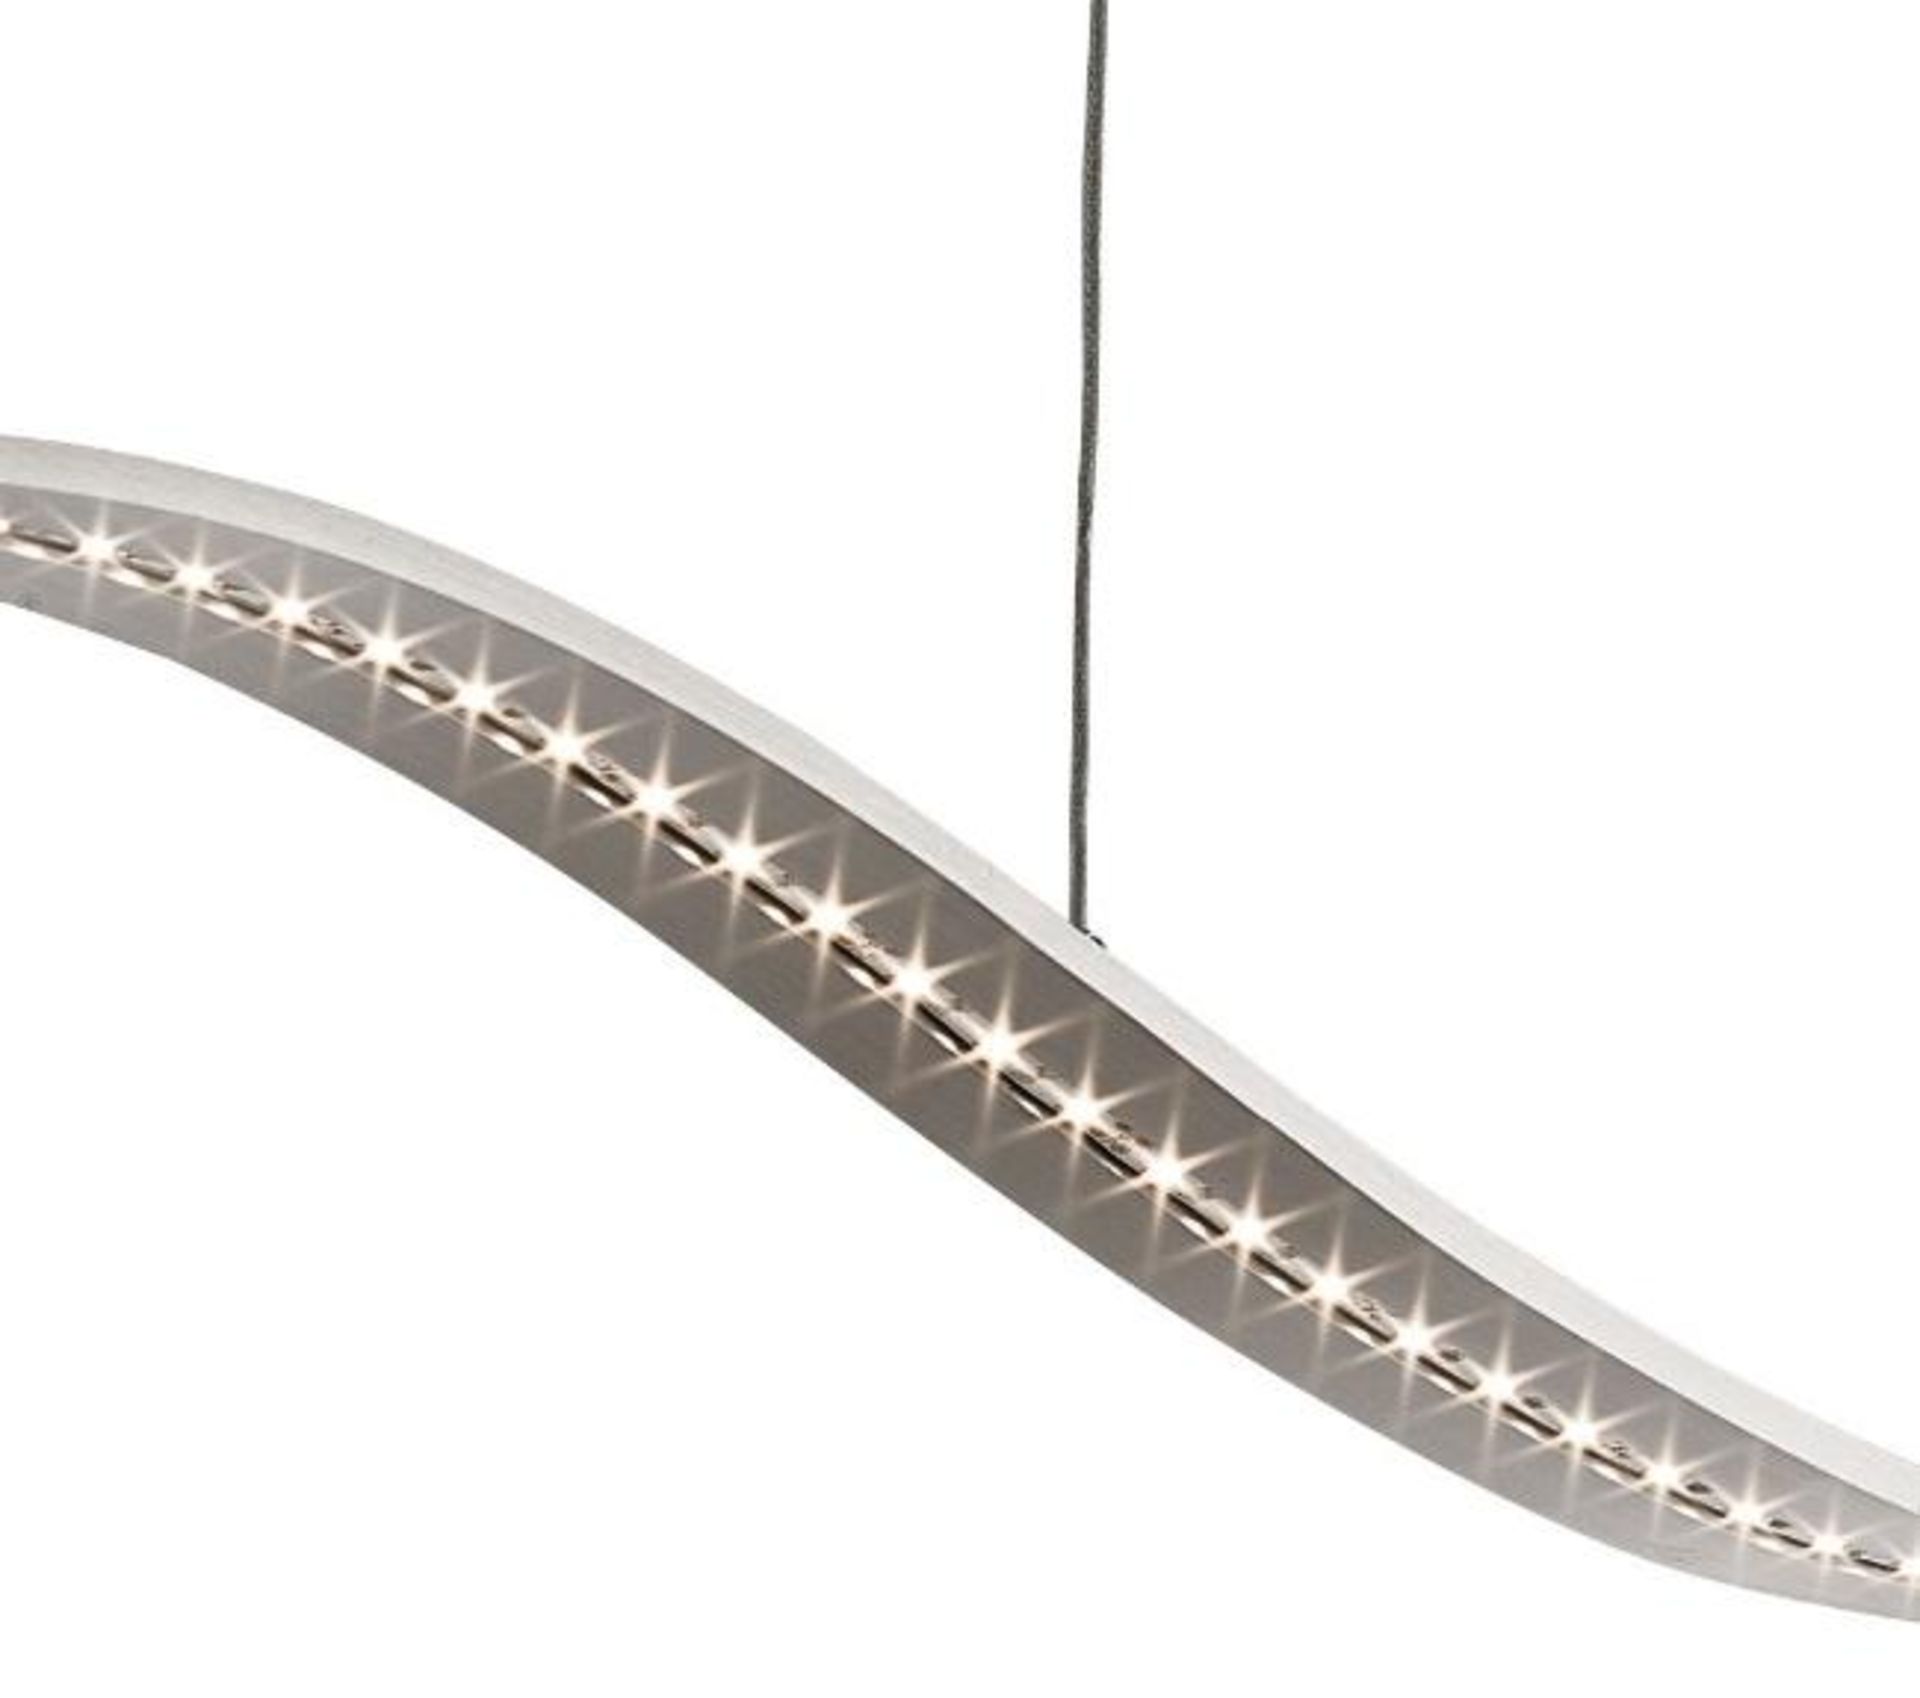 1 x Satin Silver LED Wavy Bar Light Fitting - New Boxed Stock - CL323 - Ref: 2076SS / PalF - Locatio - Image 3 of 3